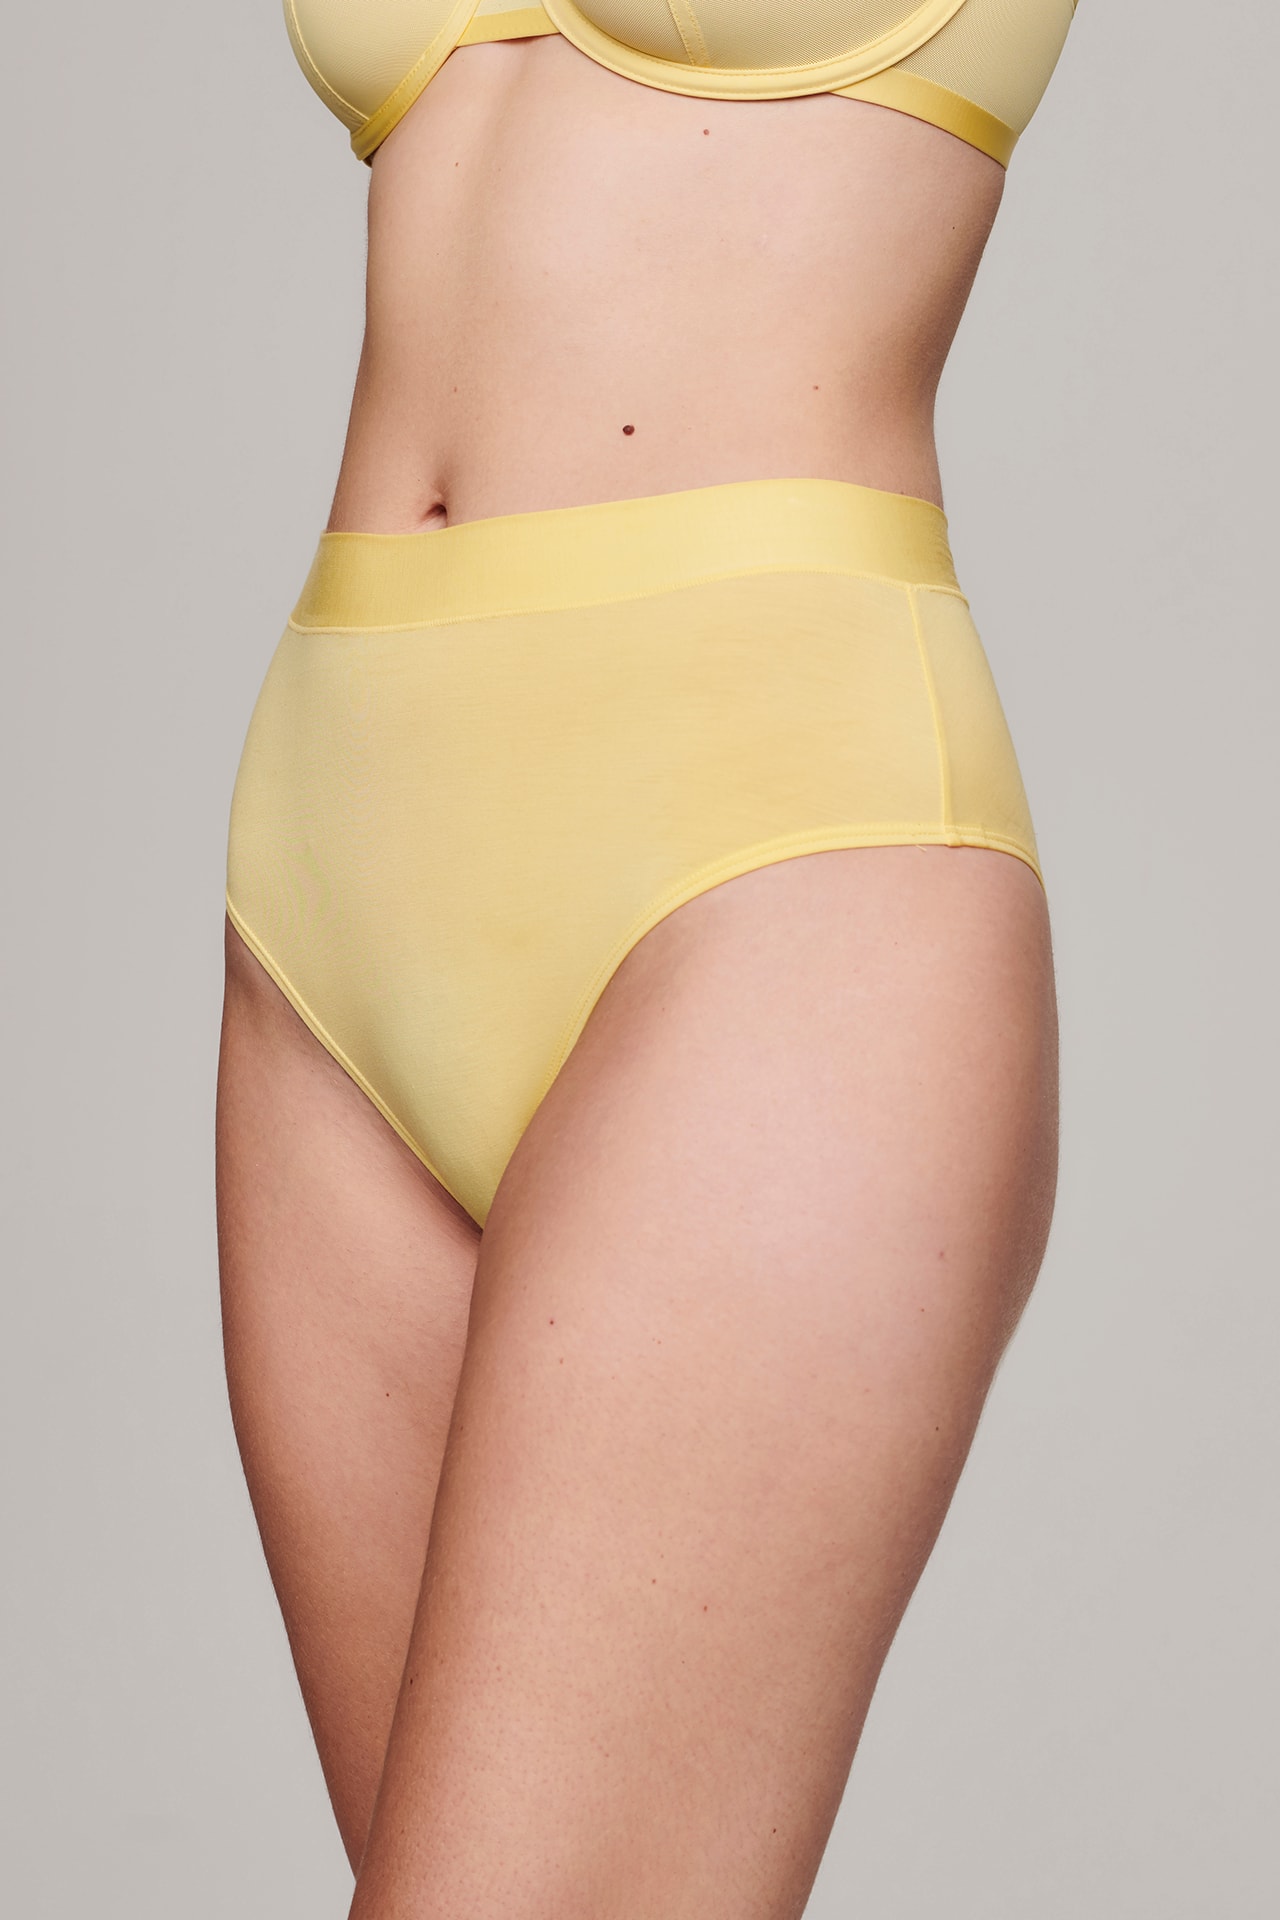 CUUP Introduces New Zest Colorway for Lingerie